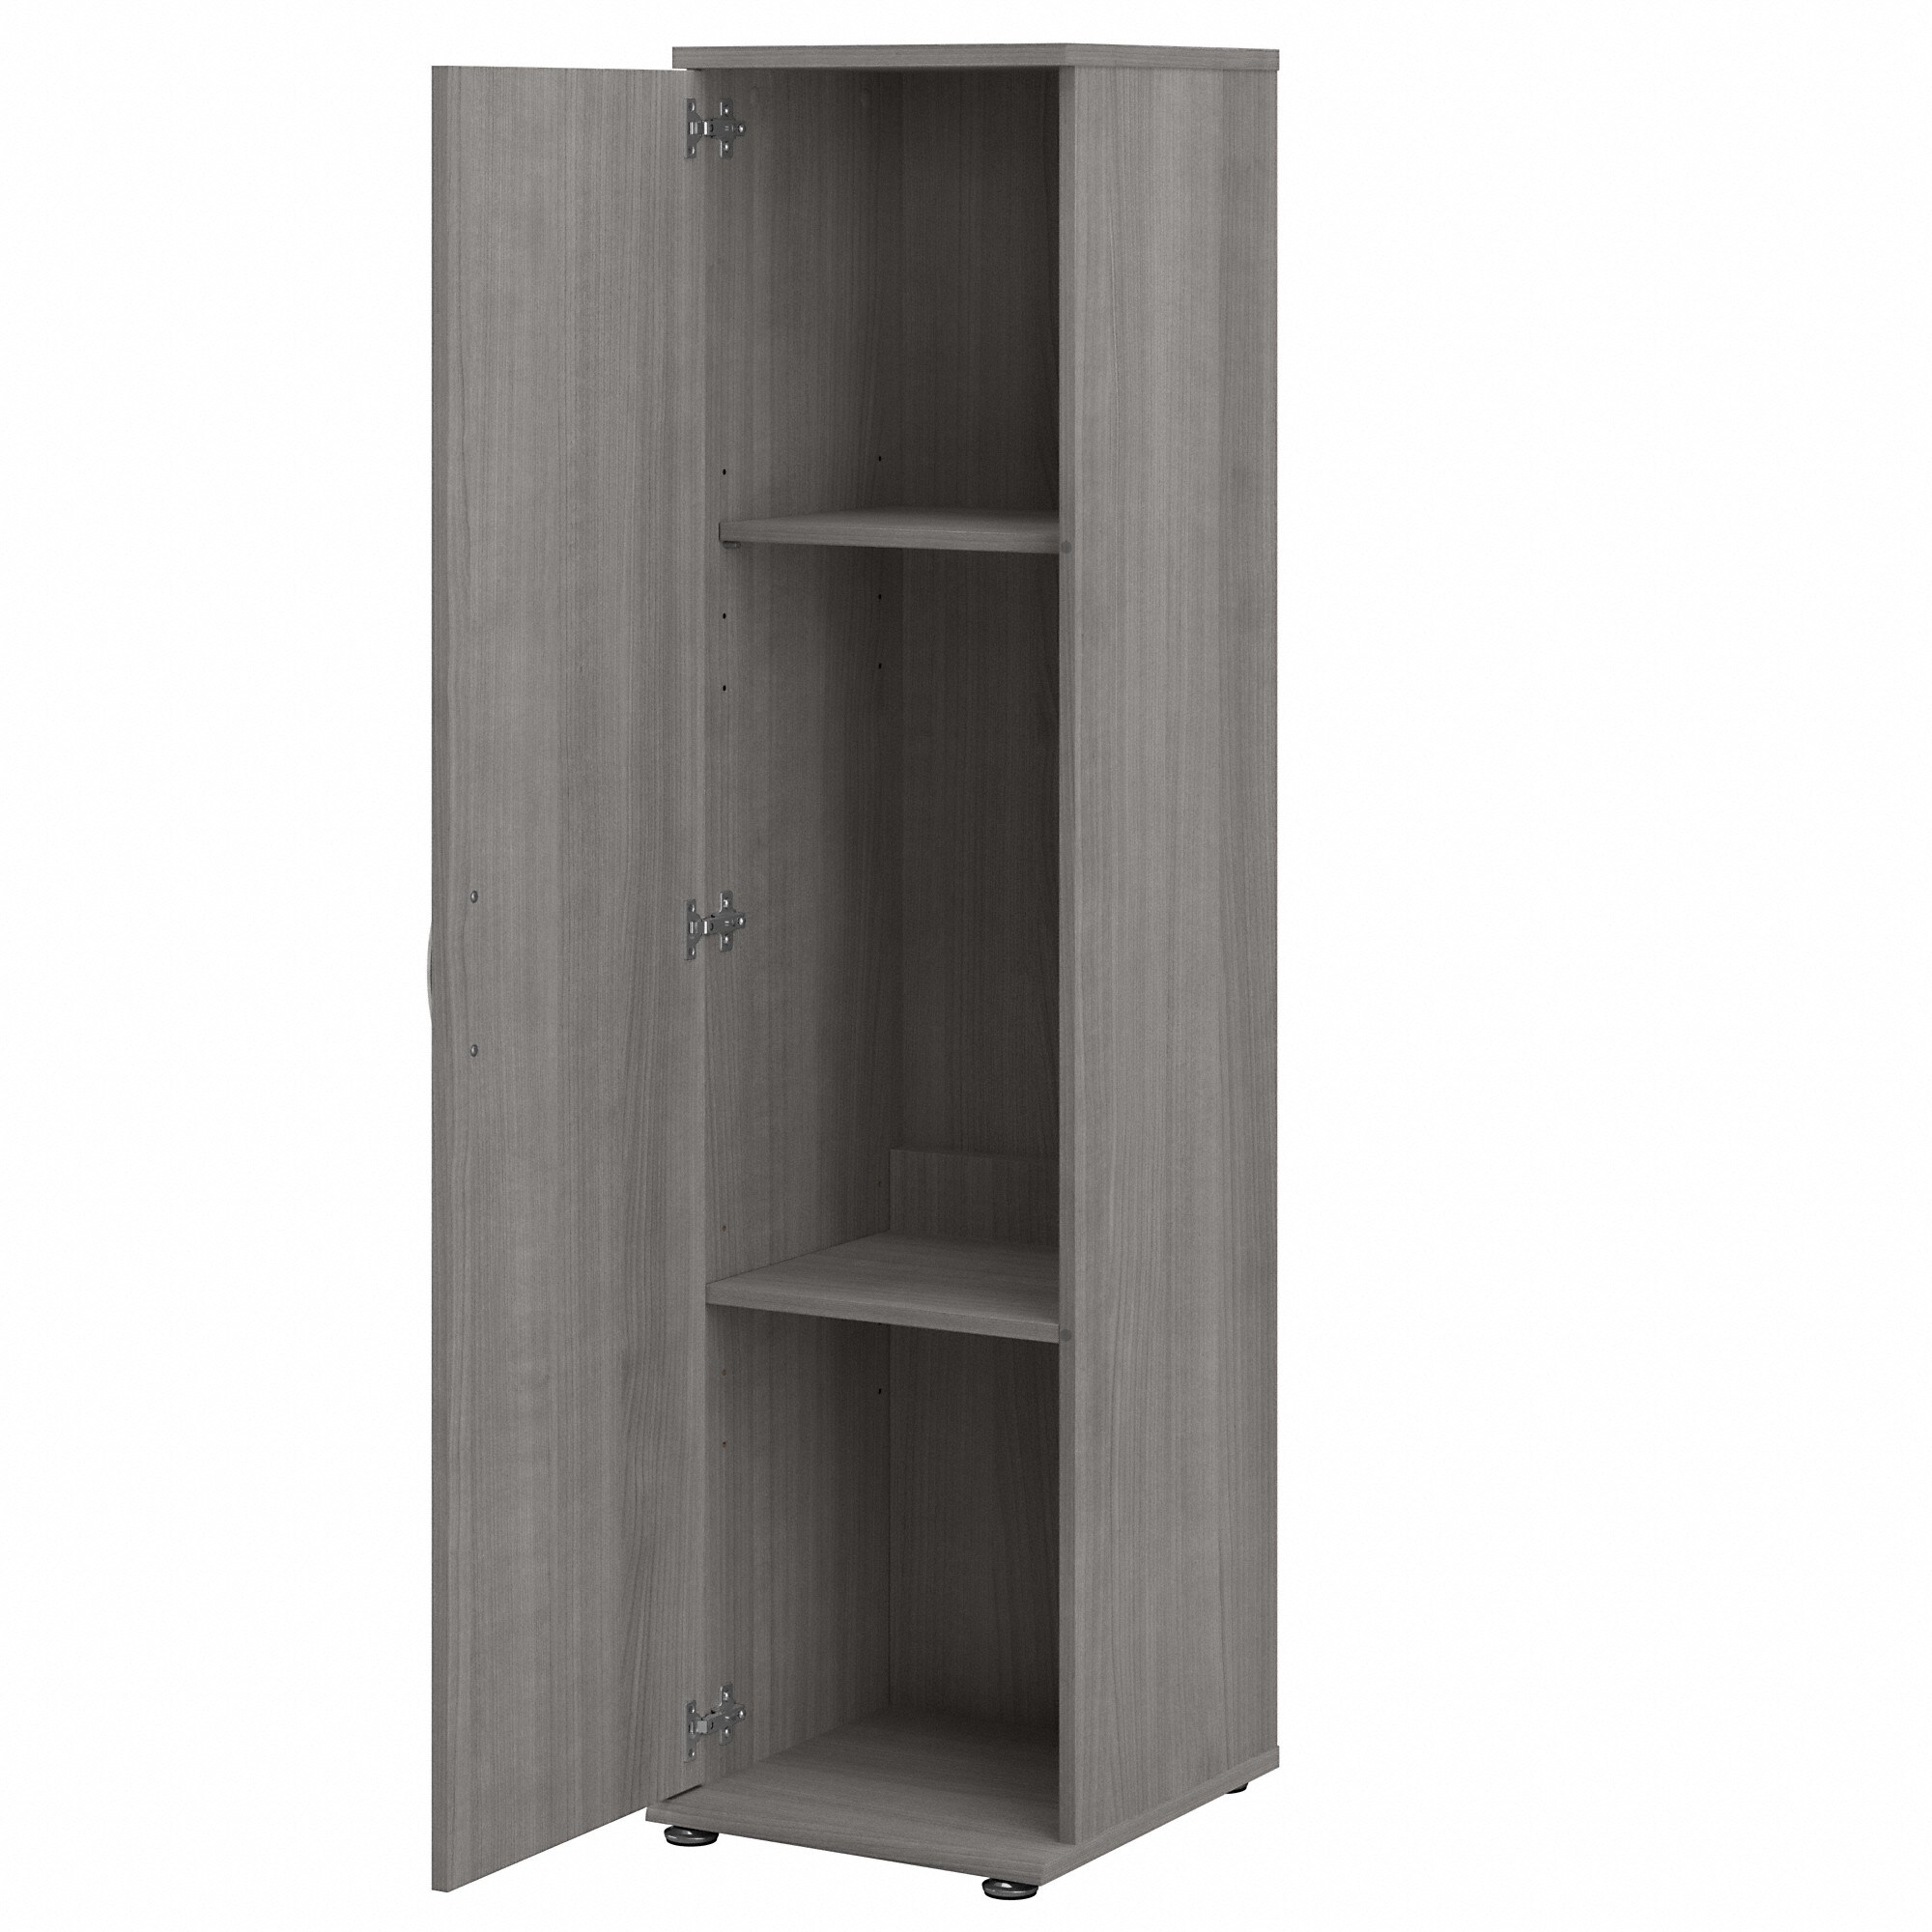 https://ak1.ostkcdn.com/images/products/is/images/direct/e49133d79f7066c8e233445ca9596ba2f3e1edaf/Universal-Tall-Narrow-Storage-Cabinet-by-Bush-Business-Furniture.jpg